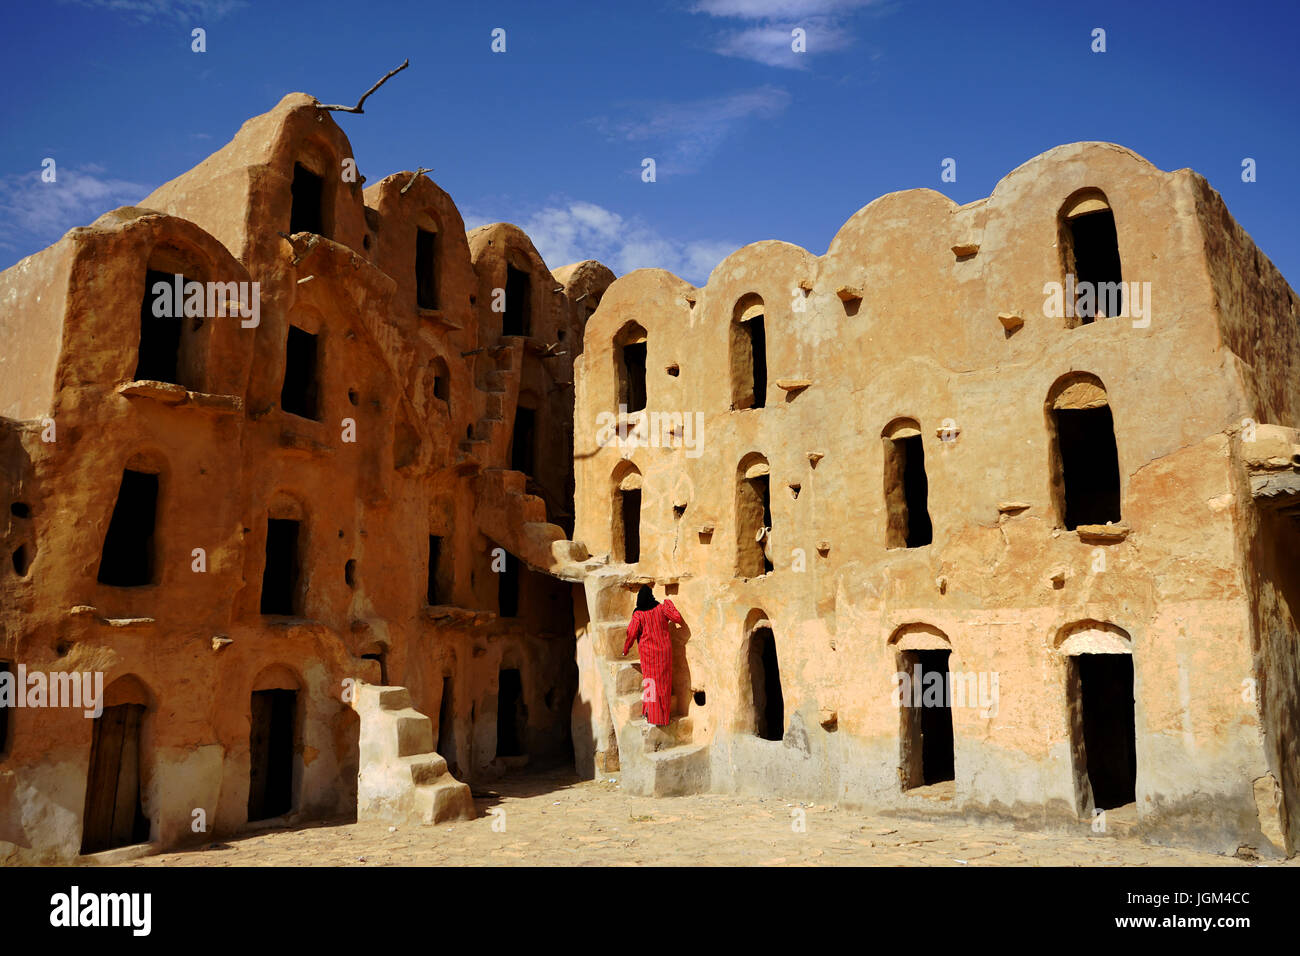 Ksar Ouled Soltane, an ancient fortified granary, or ksar, located in the Tataouine district in southern Tunisia Stock Photo